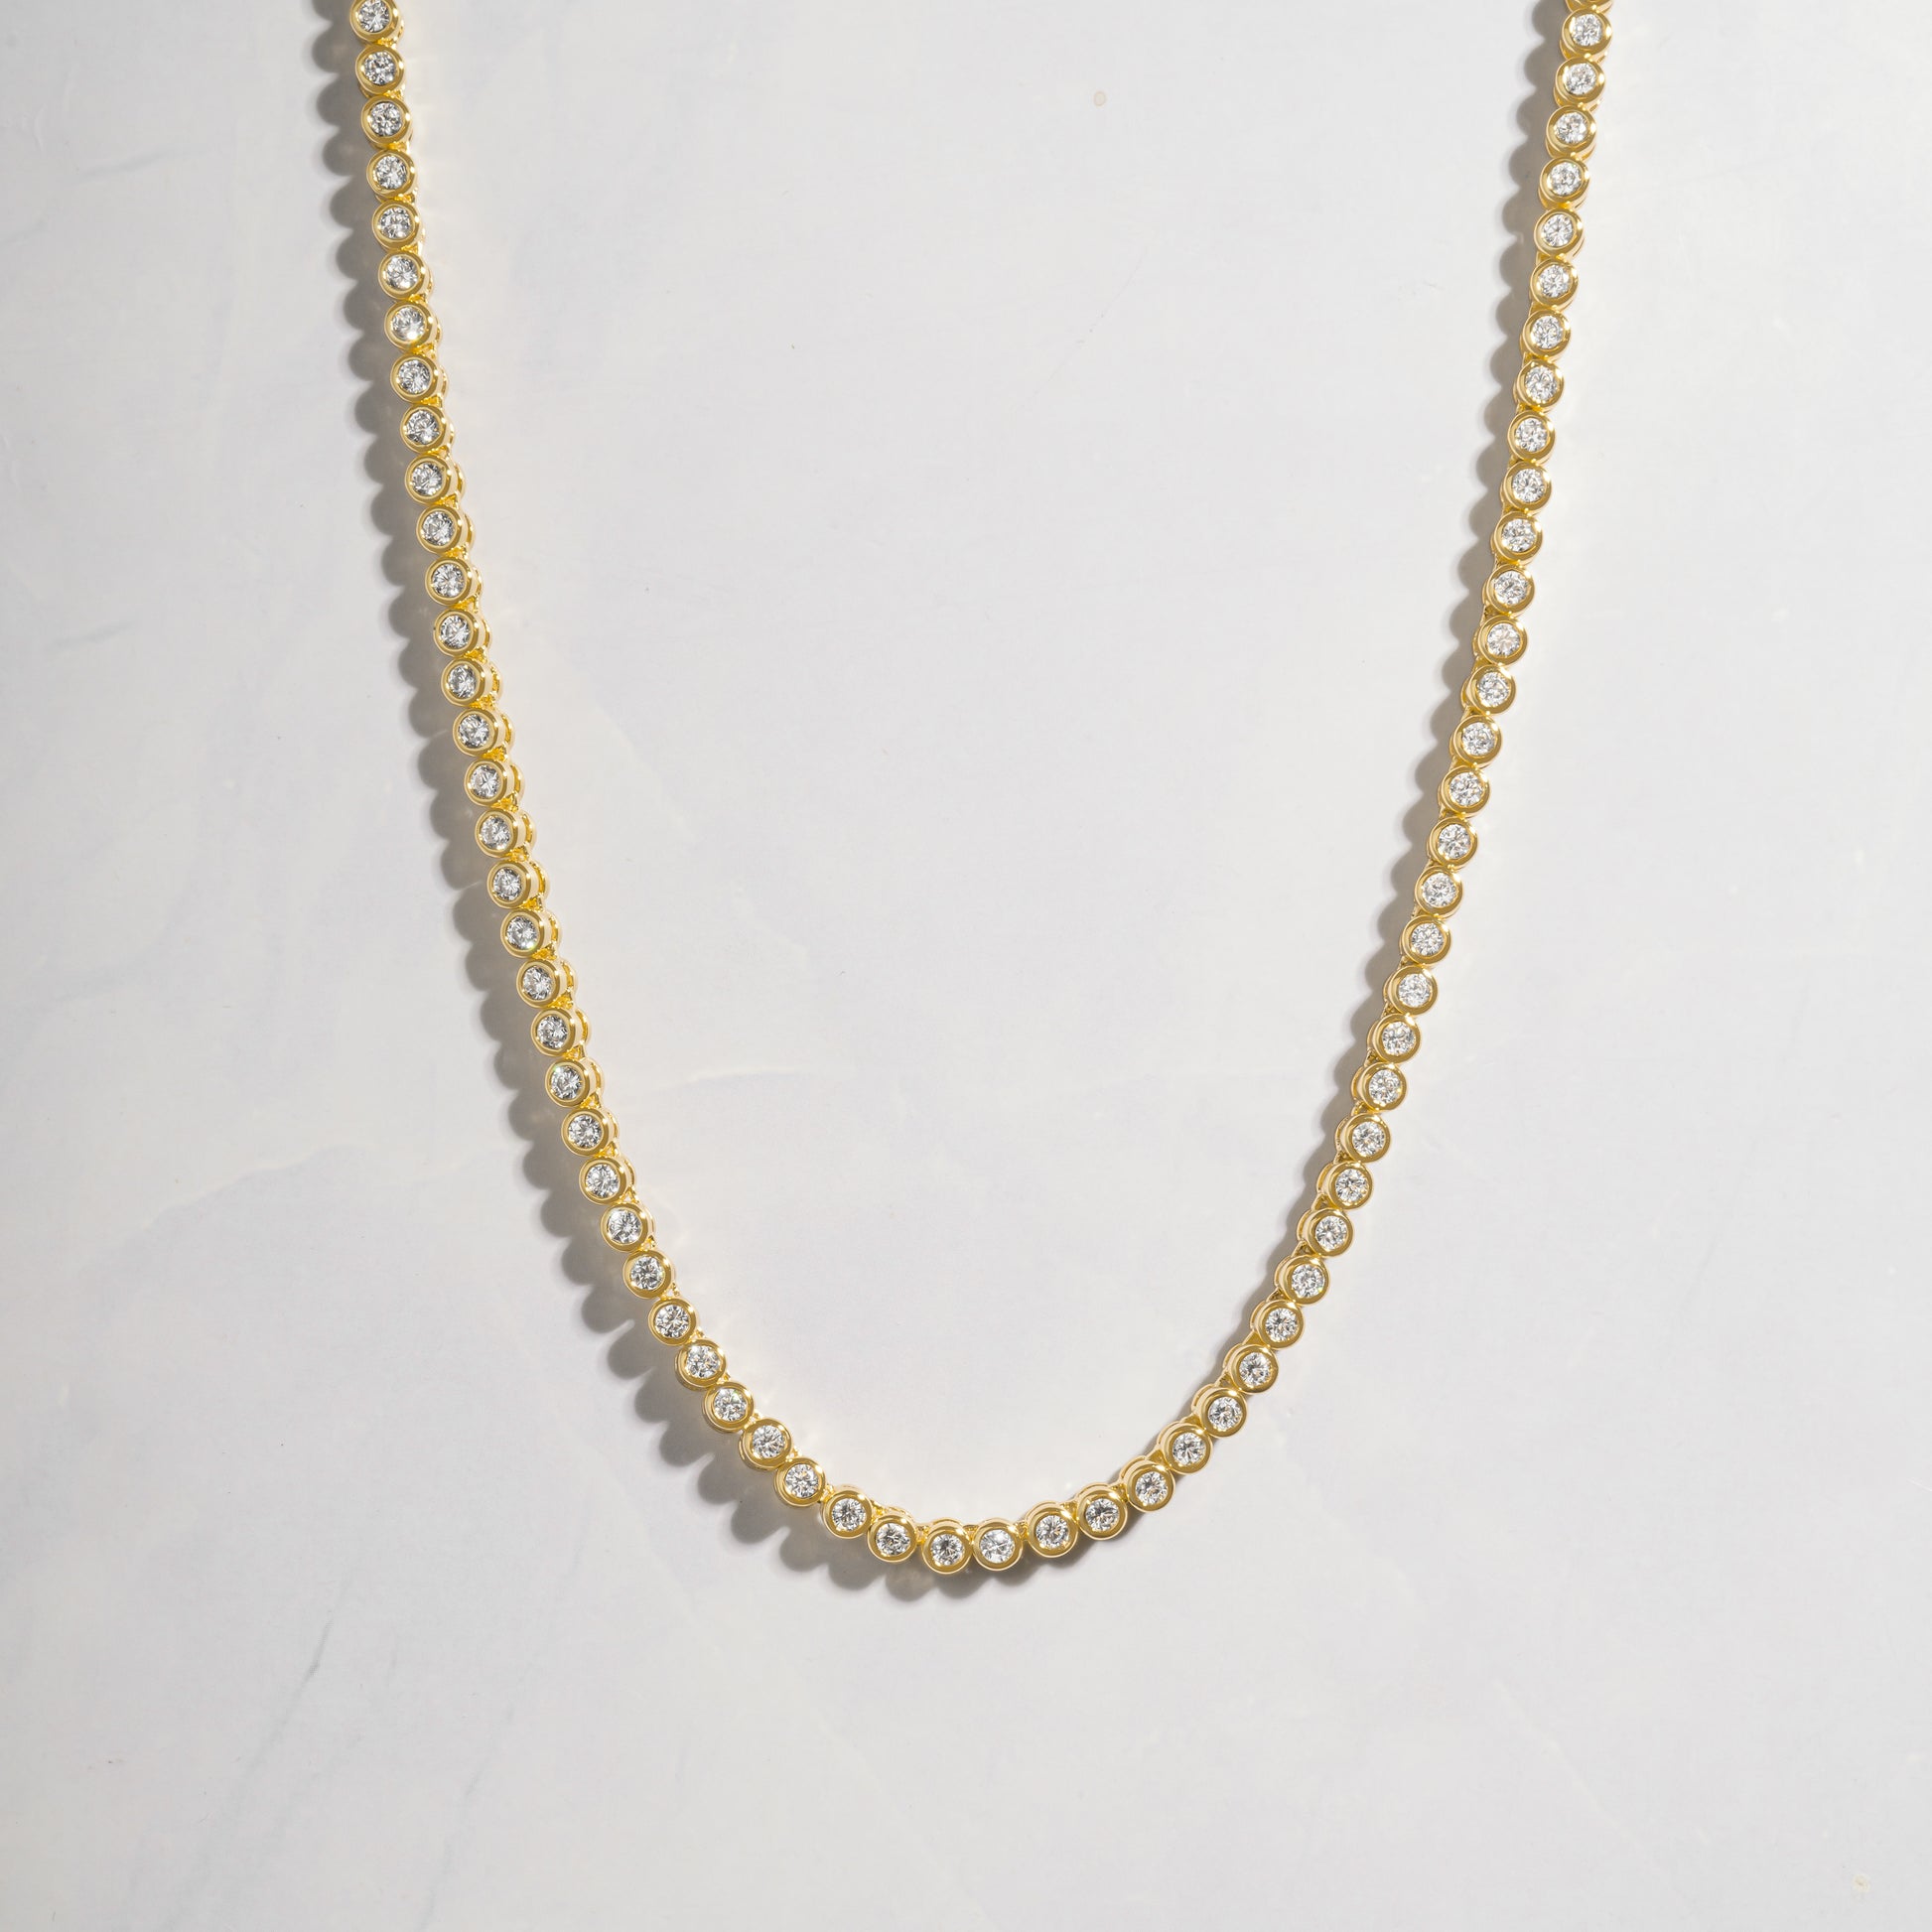 a gold necklace with pearls on a white background